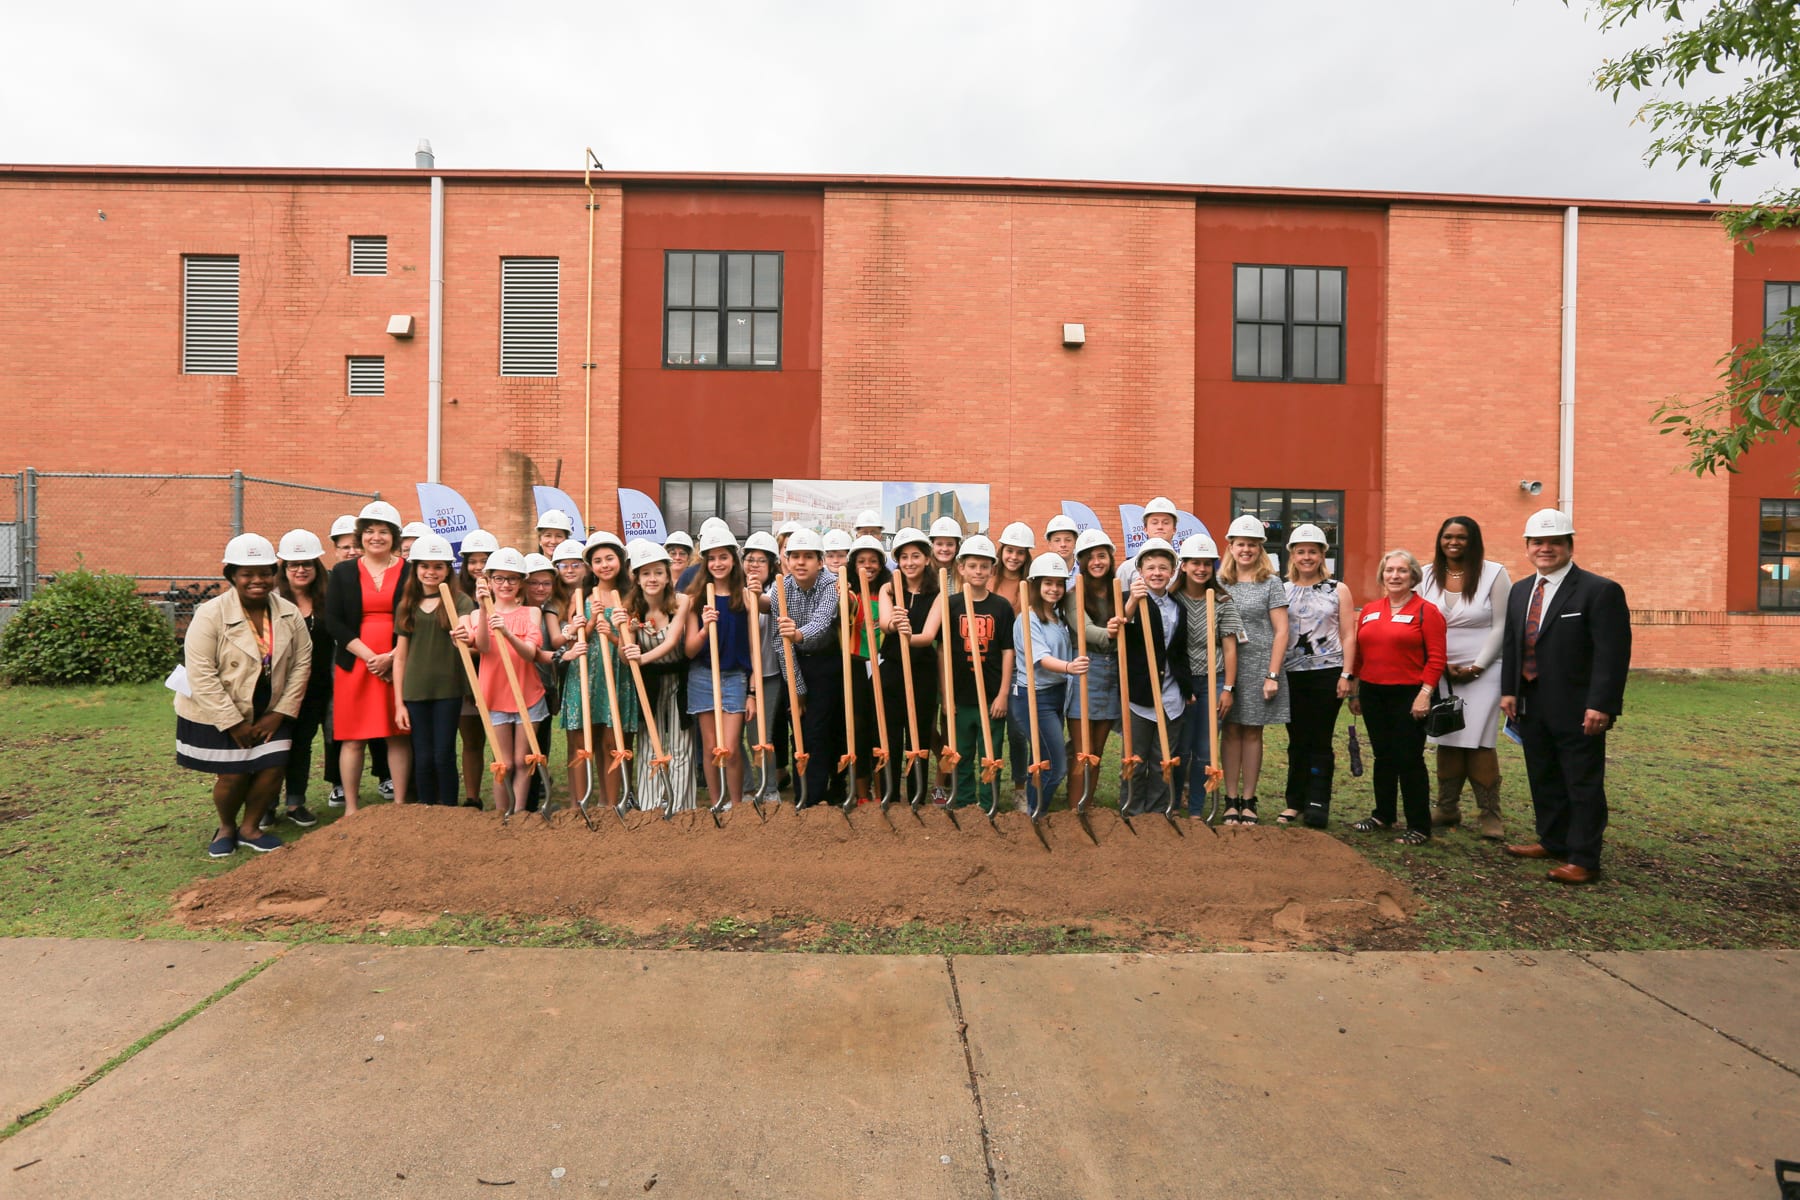 Murchison Middle School Groundbreaking student government and staff welcome Austin ISD to groundbreaking ceremony.